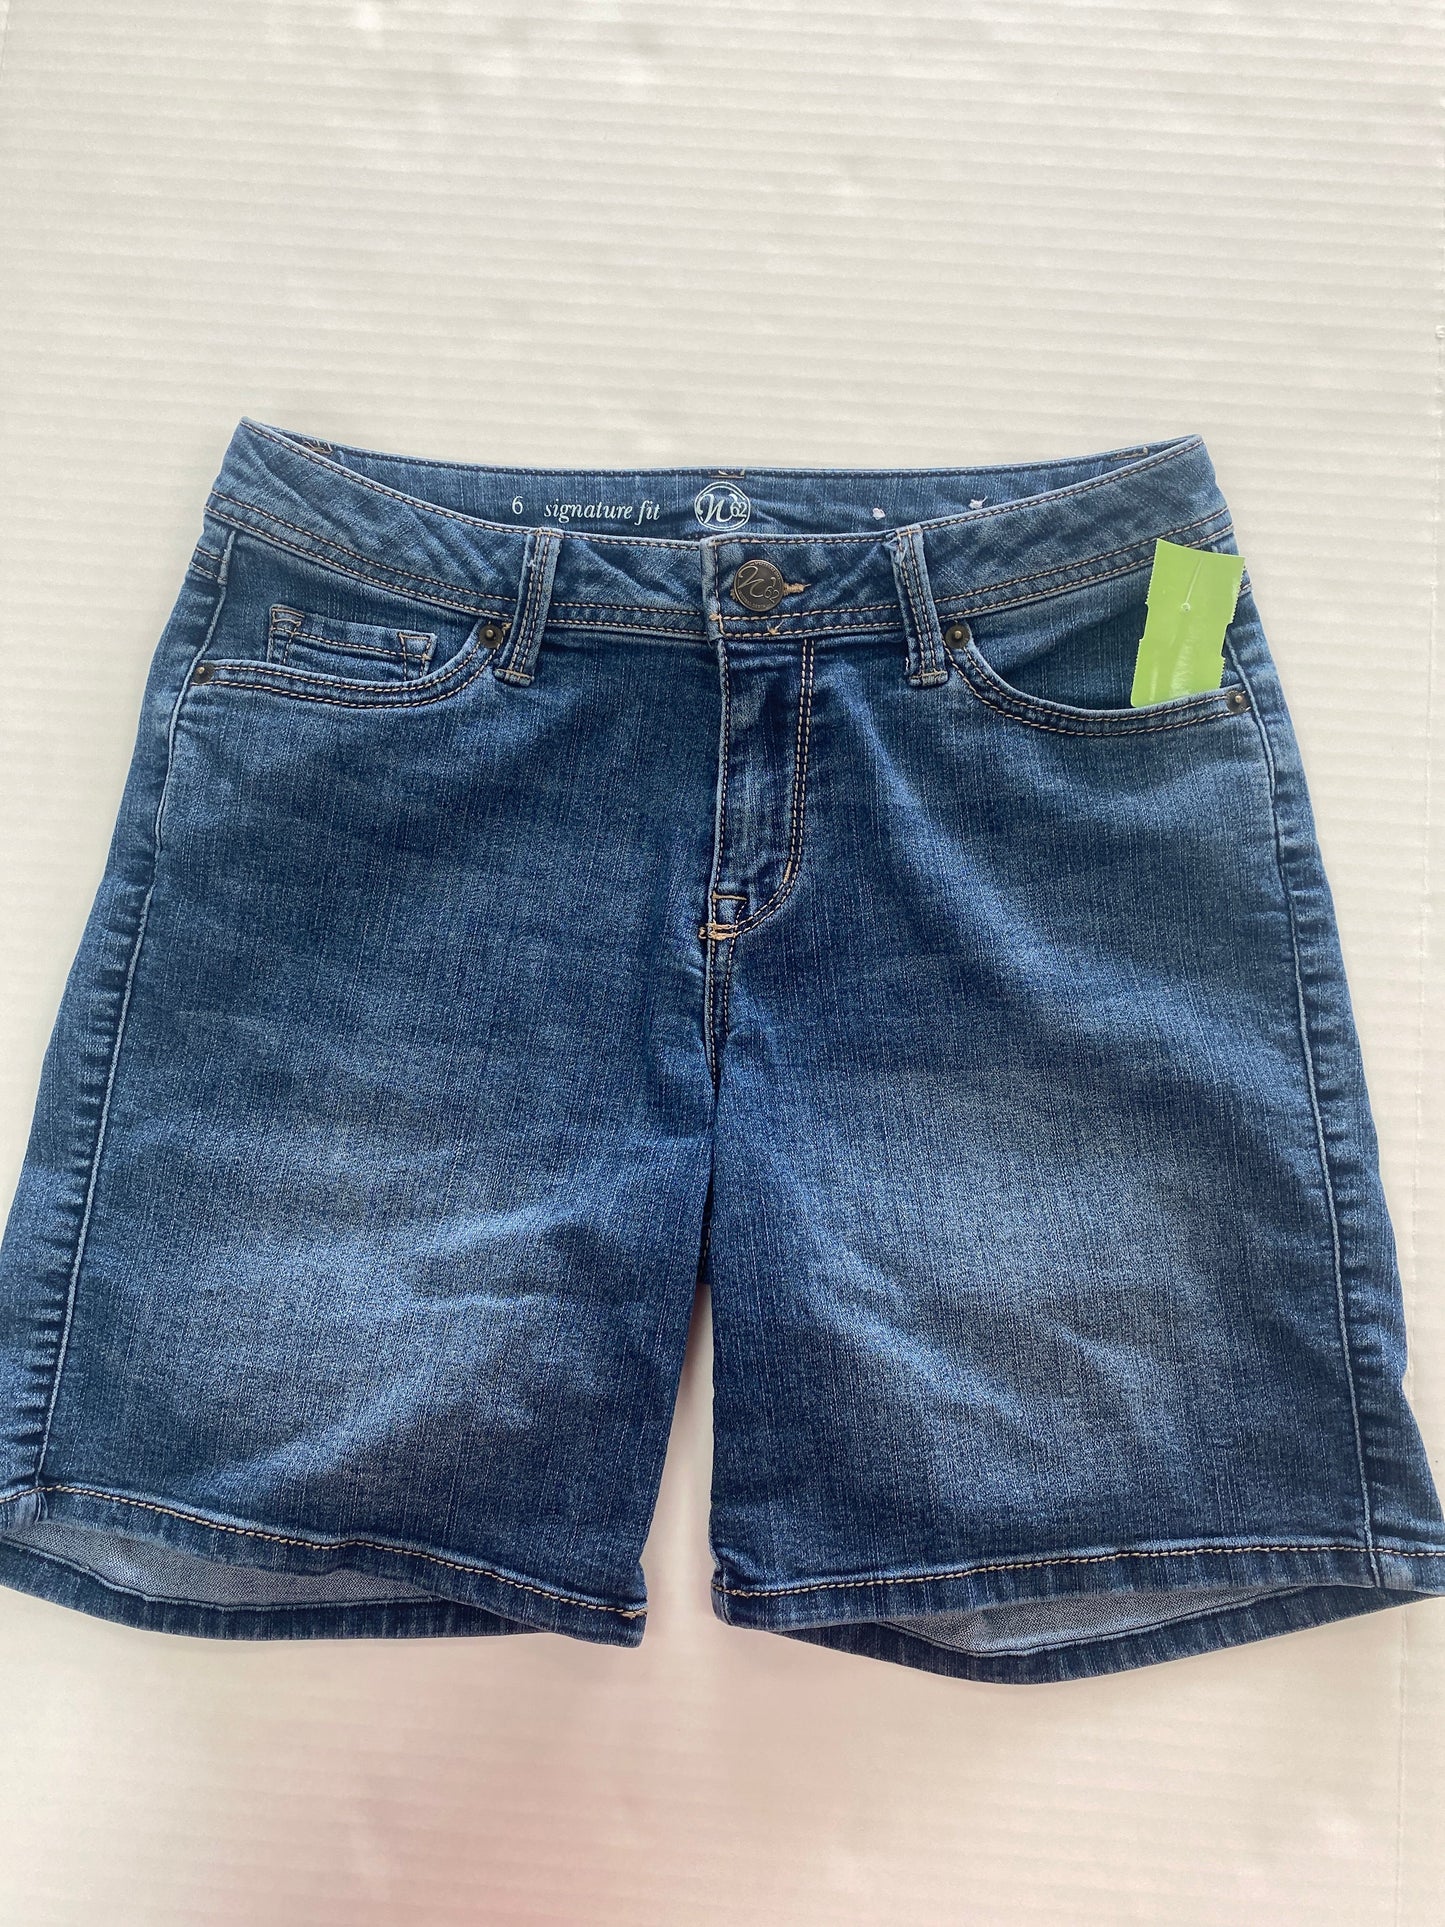 Shorts By Westport  Size: 6